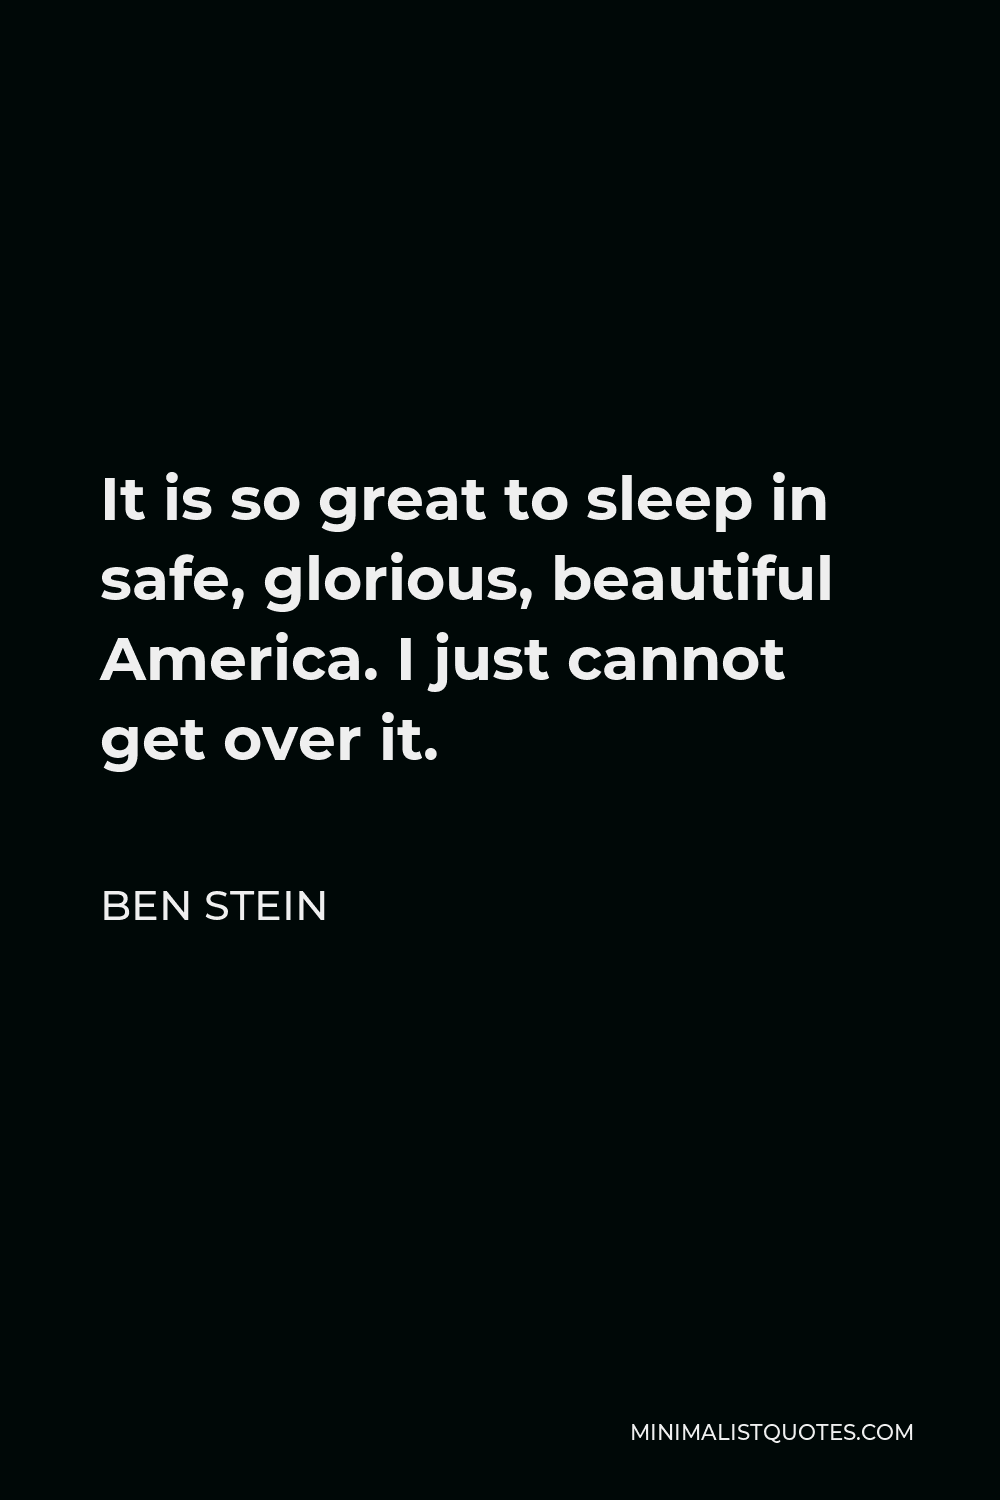 Ben Stein Quote - It is so great to sleep in safe, glorious, beautiful America. I just cannot get over it.